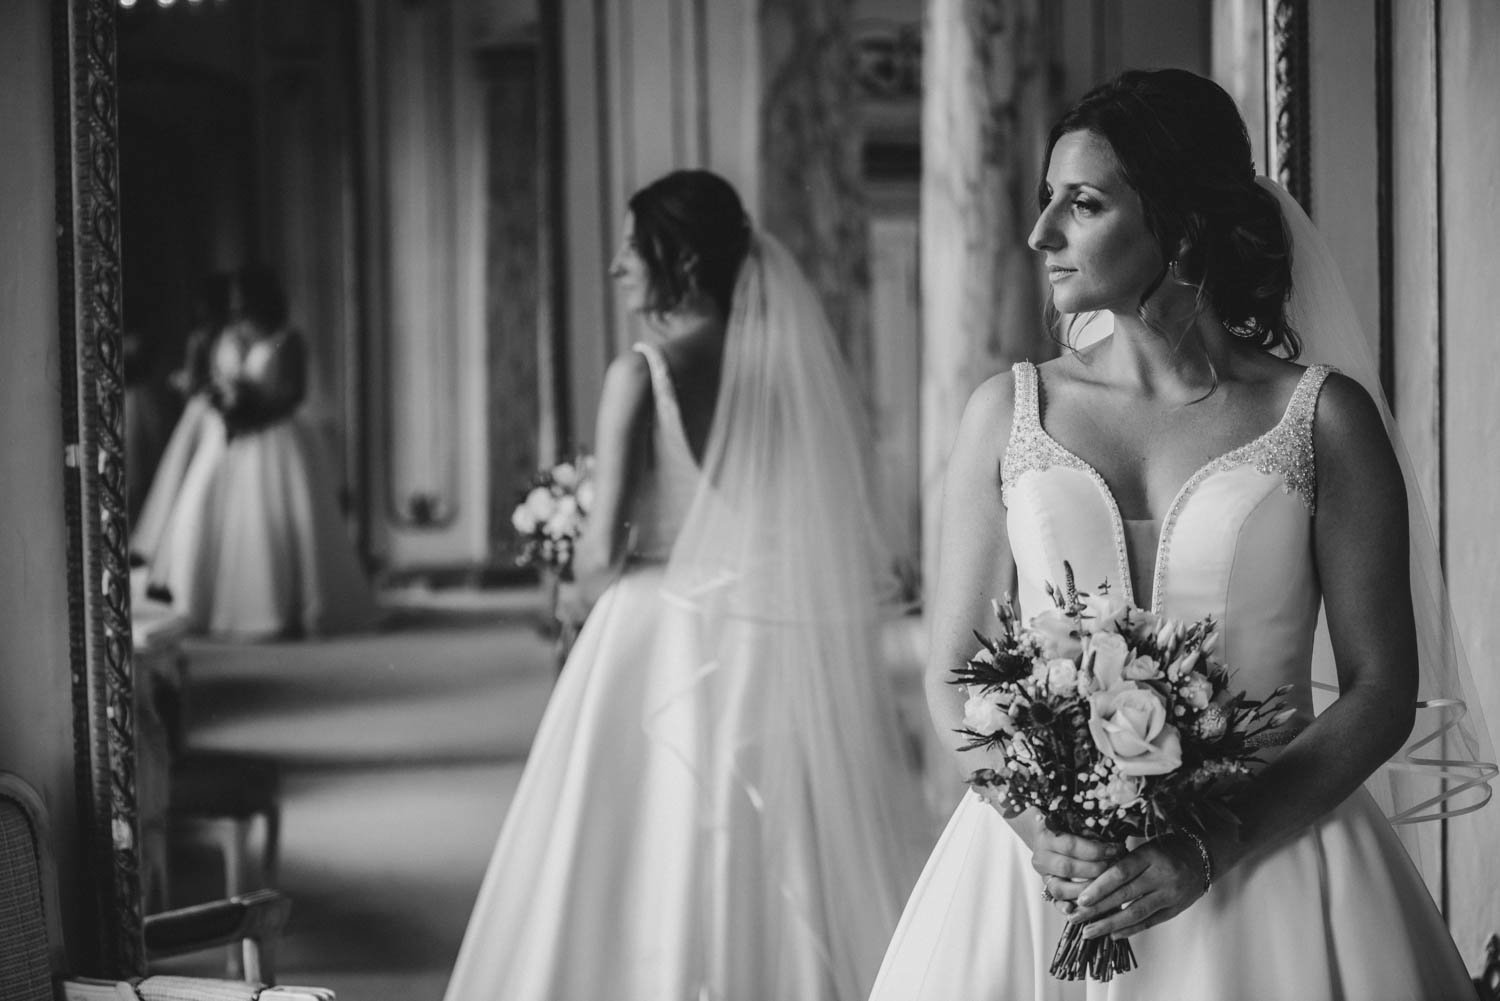 Bride stood in front of large mirror of bridal suite with reflections